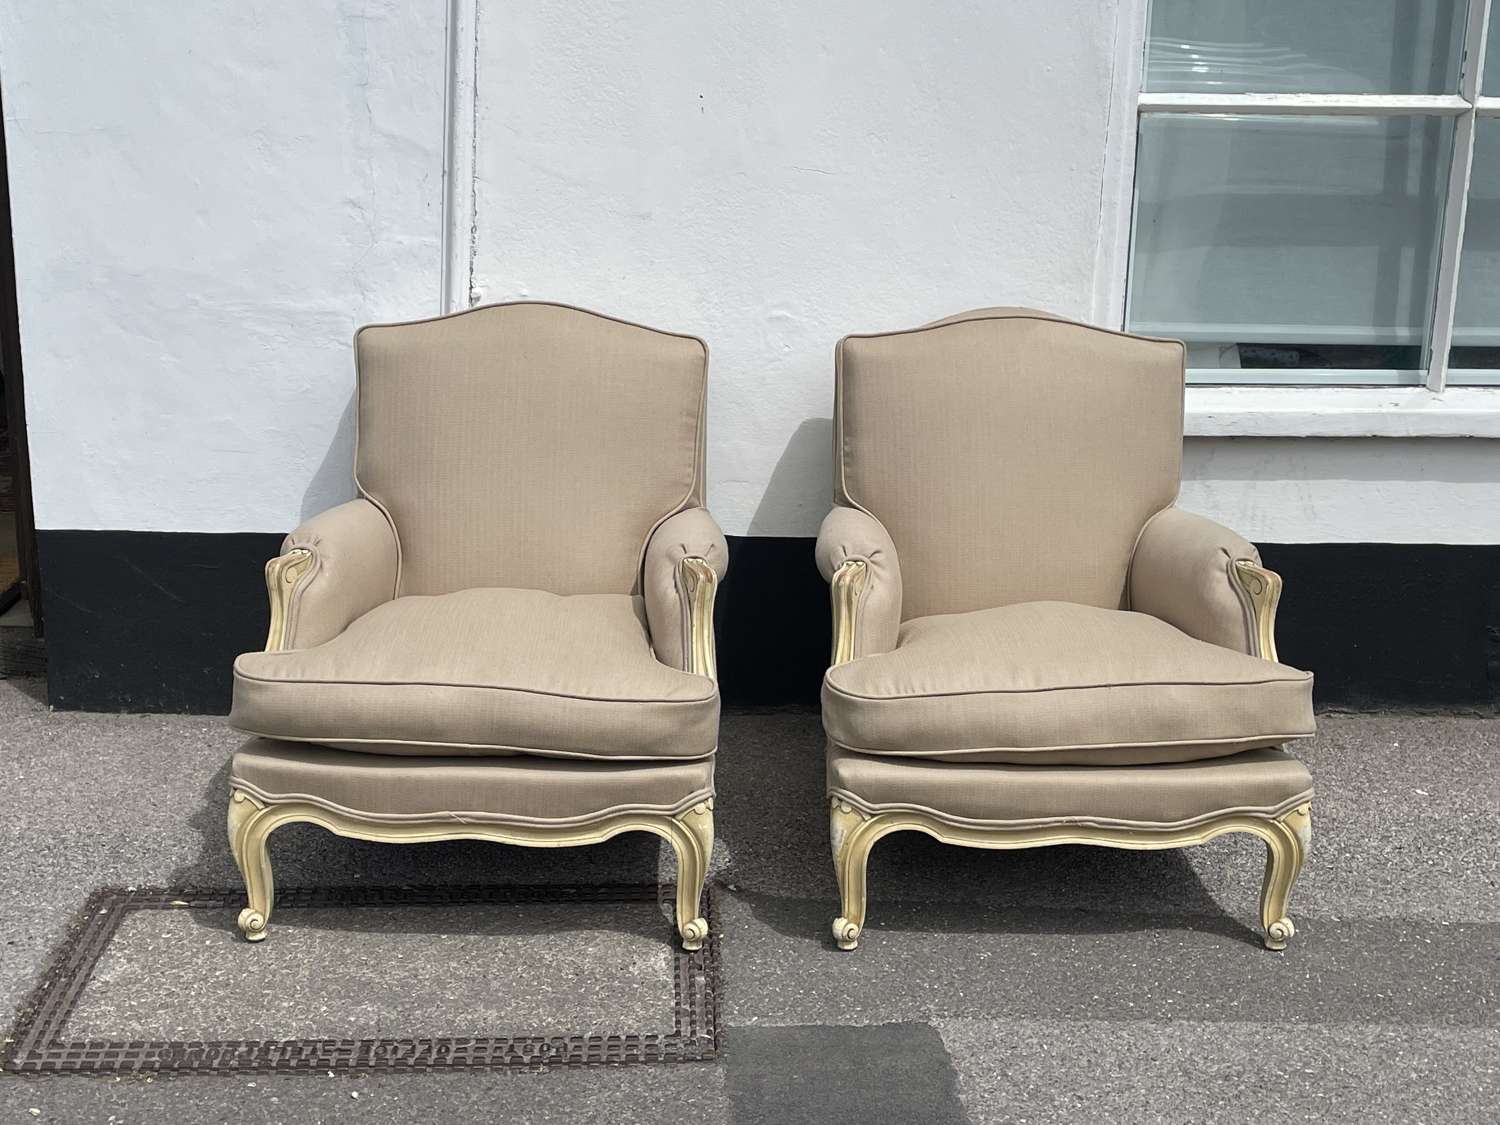 Pair Of French “Comfy” Armchairs